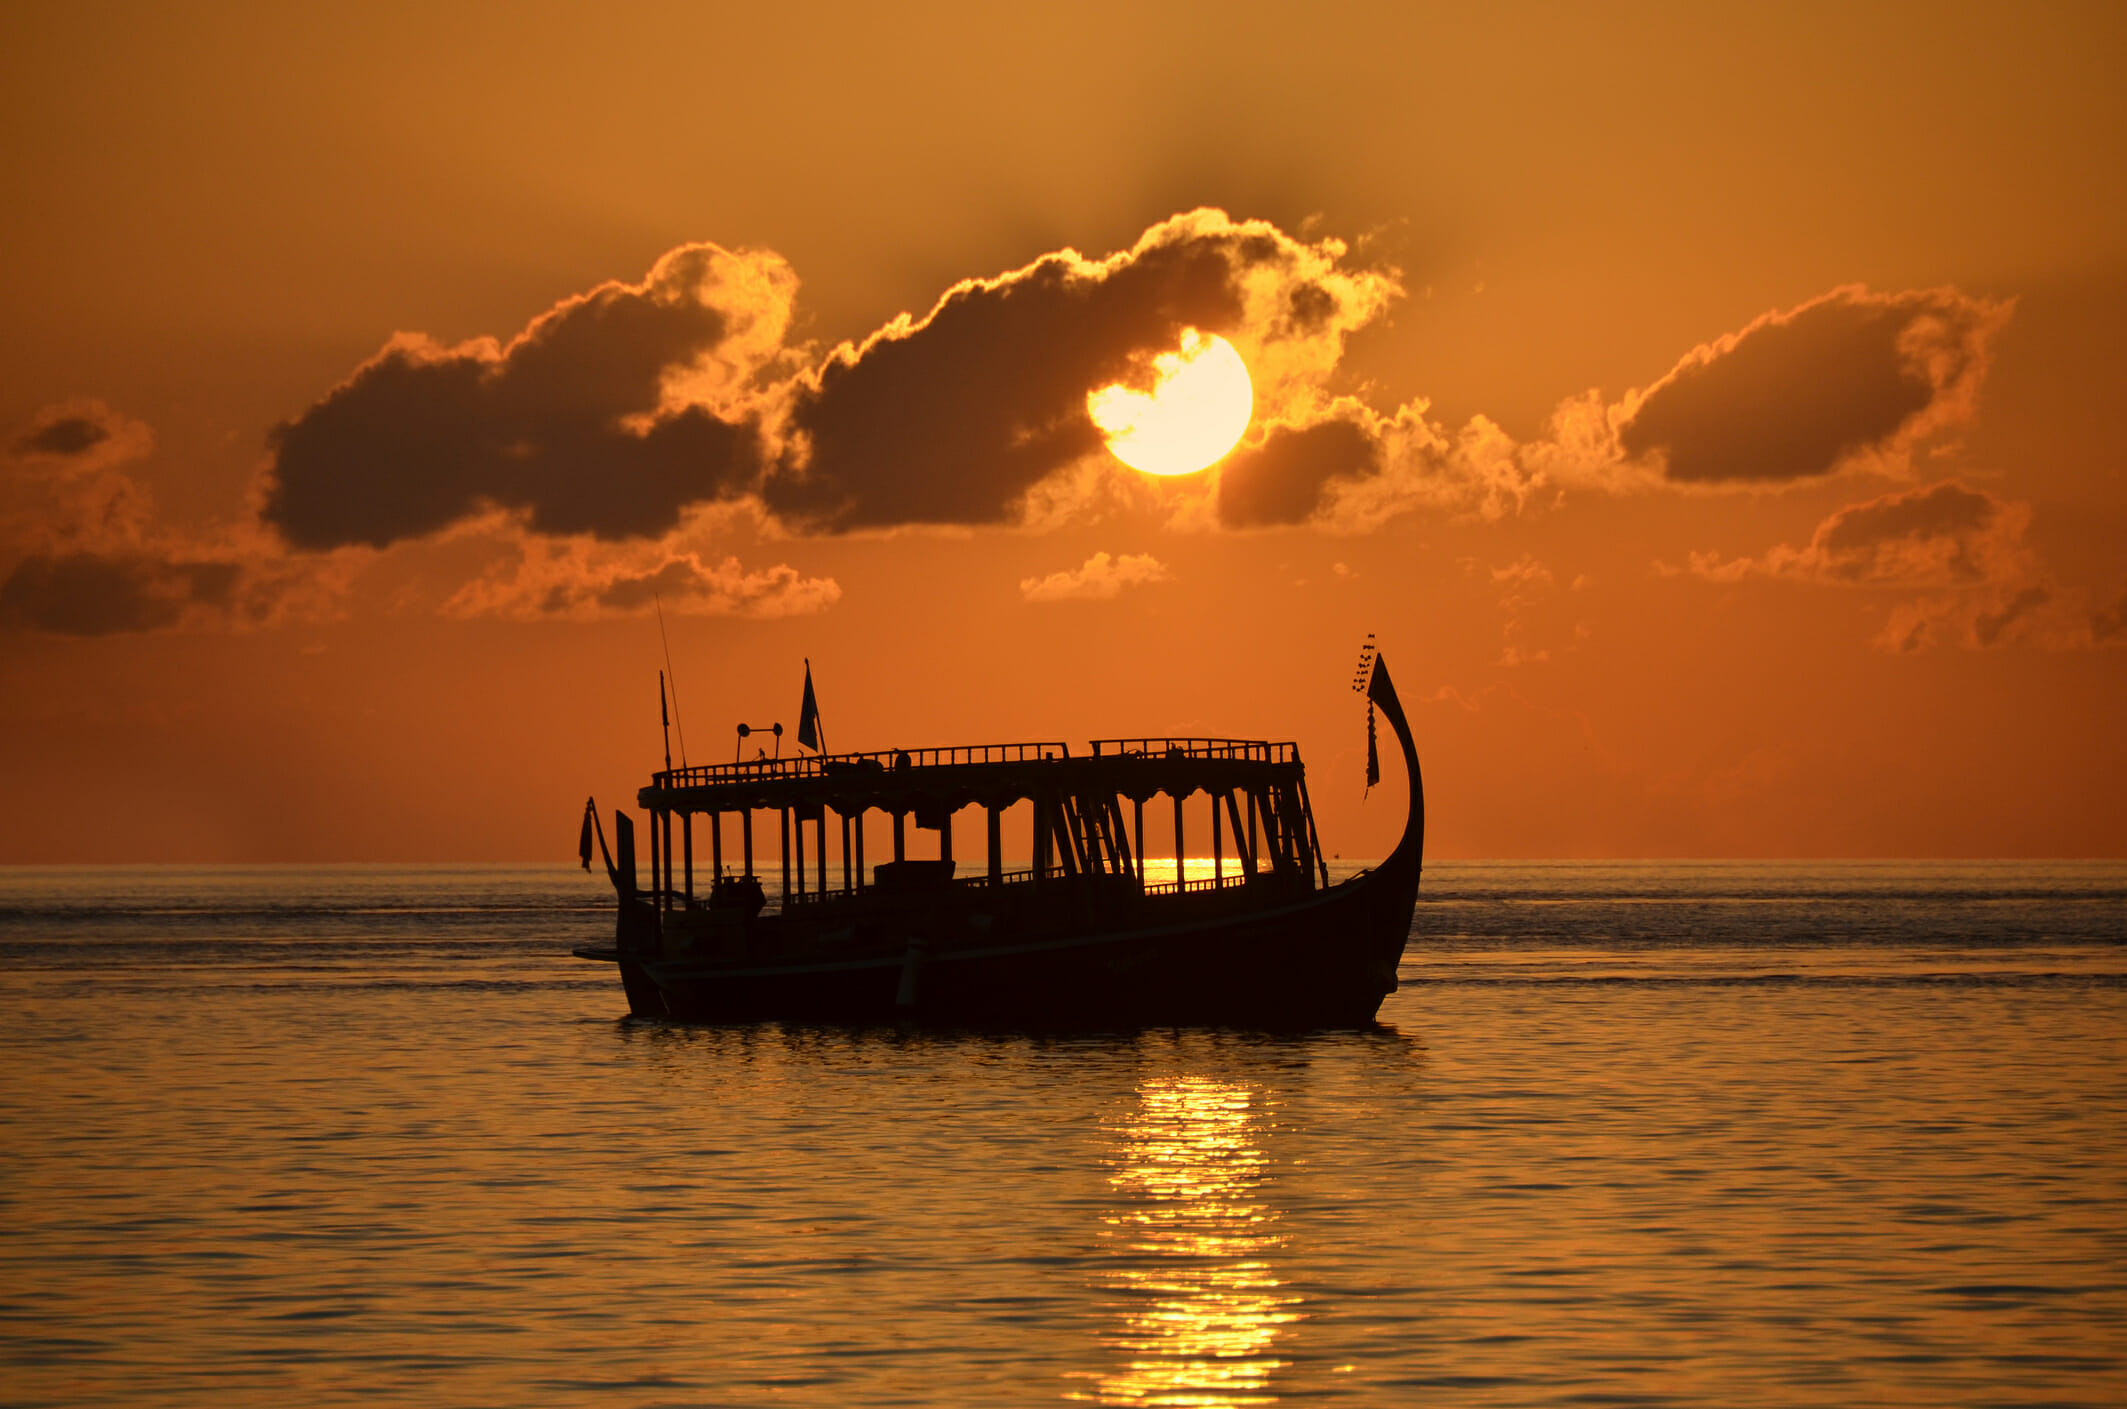 Silhouette of a Dhoni (traditional Maldivian boat) in the tropical lagoon of Biyadhoo Island, Maldives, at sunset with bright orange-reddish sky.